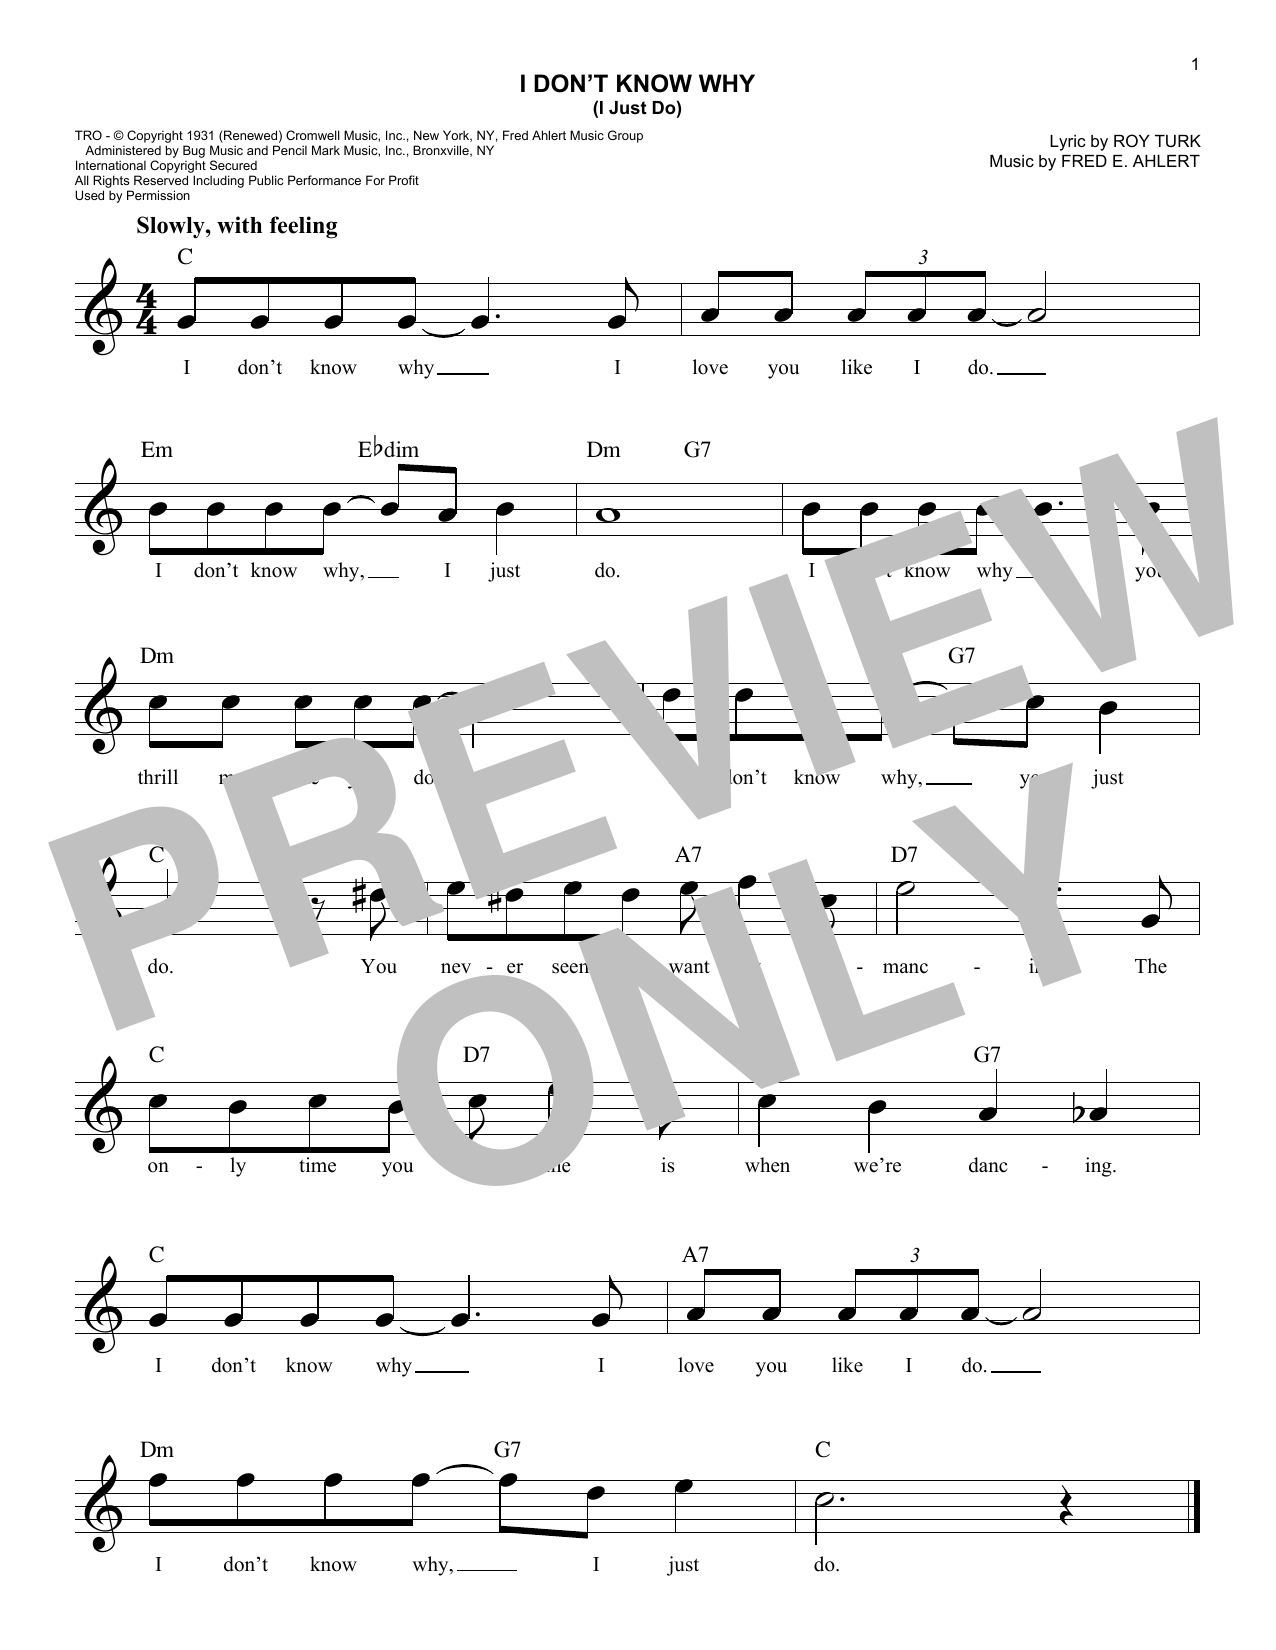 Roy Turk I Don't Know Why (I Just Do) sheet music notes and chords. Download Printable PDF.